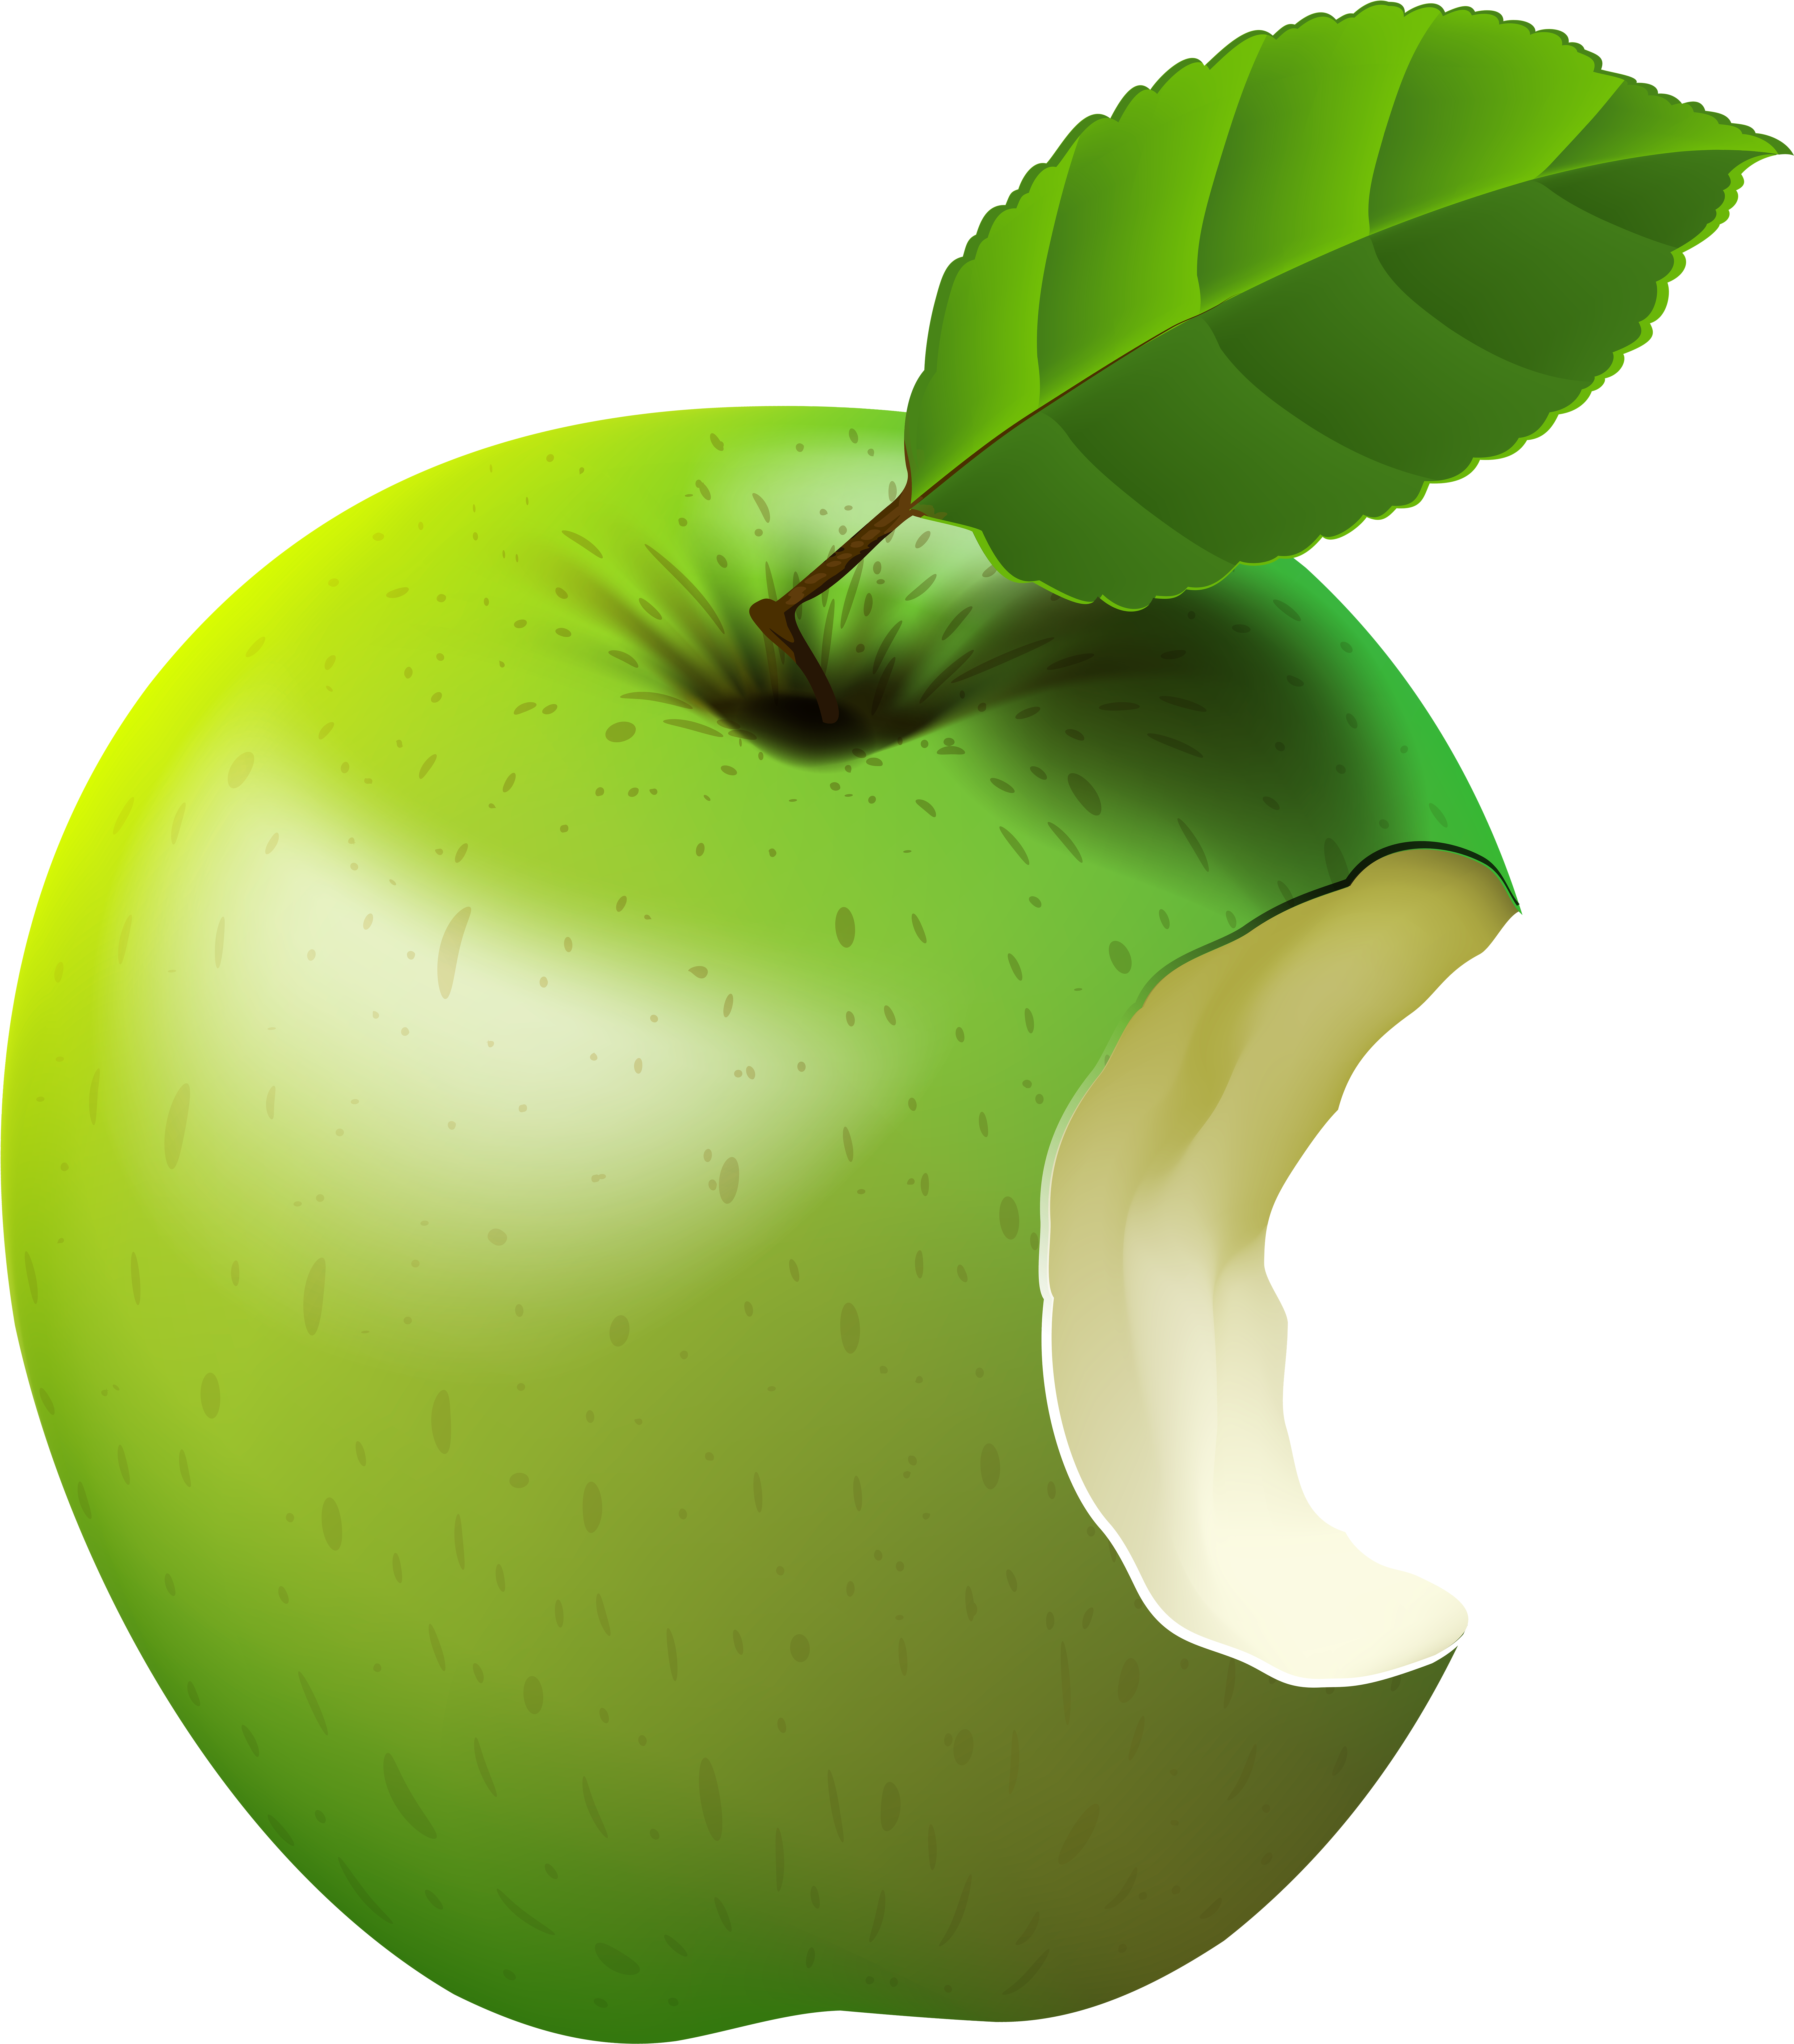 A Green Apple With A Bite Taken Out Of It